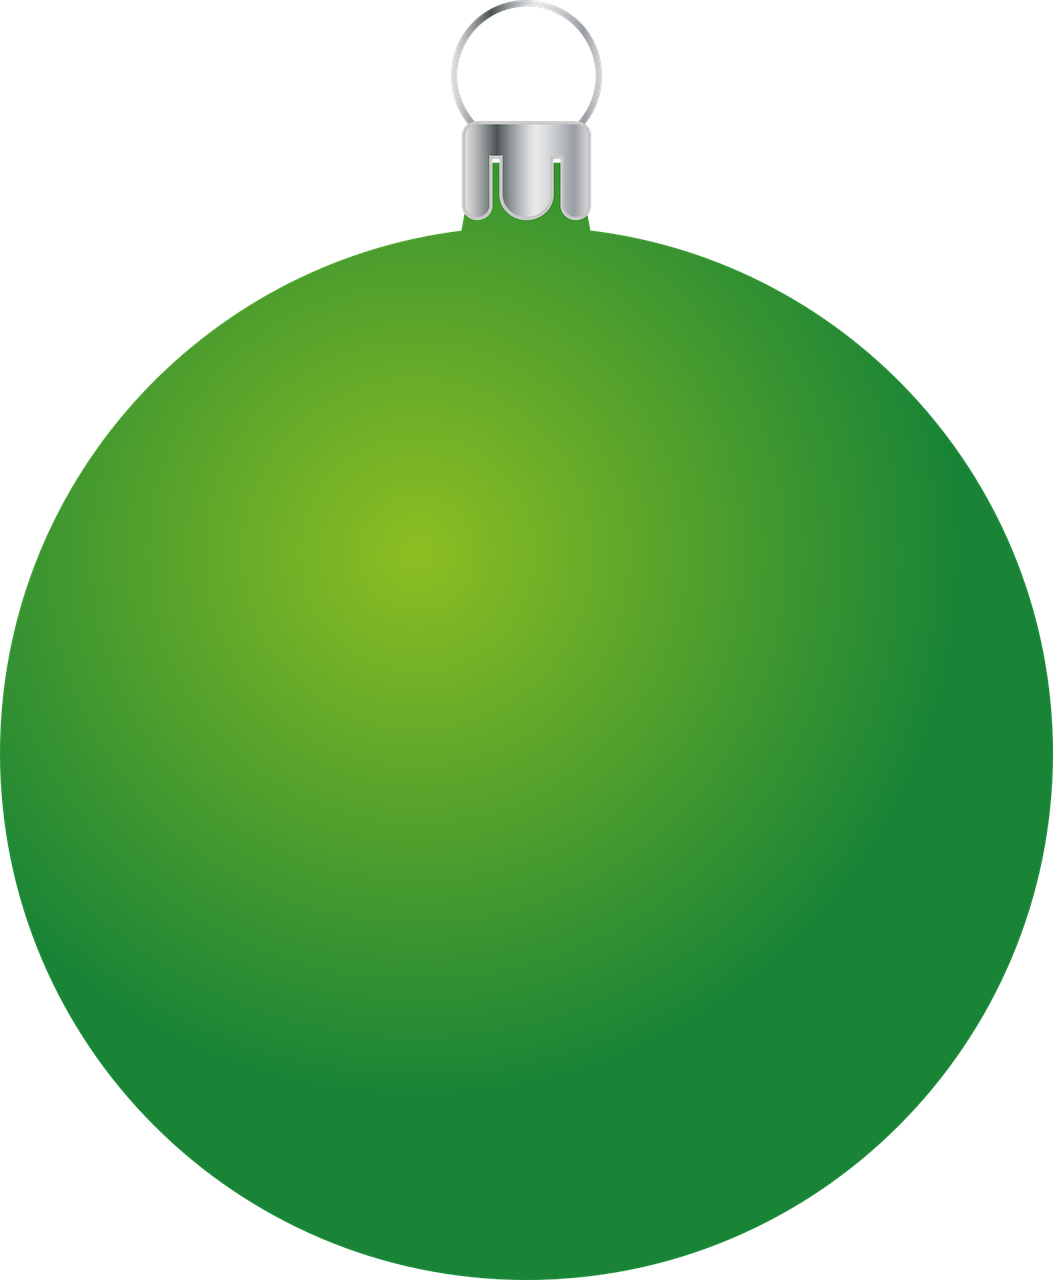 Green Natal Bauble PNG Clipart